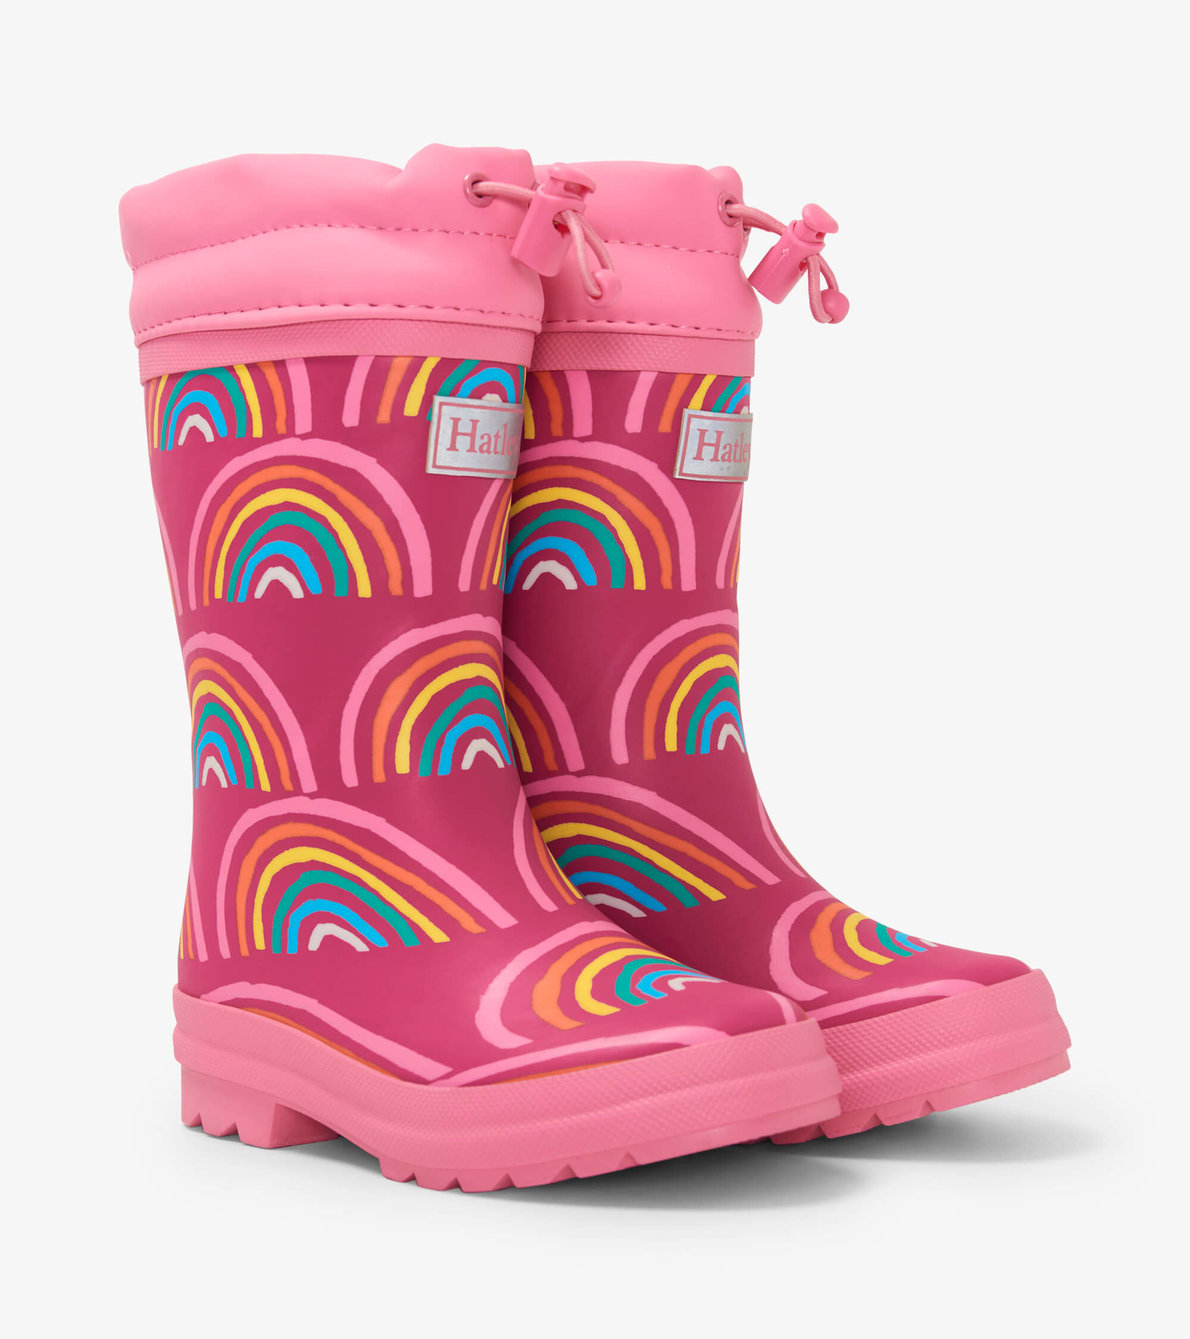 View larger image of Rainy Rainbows Sherpa Lined Wellies